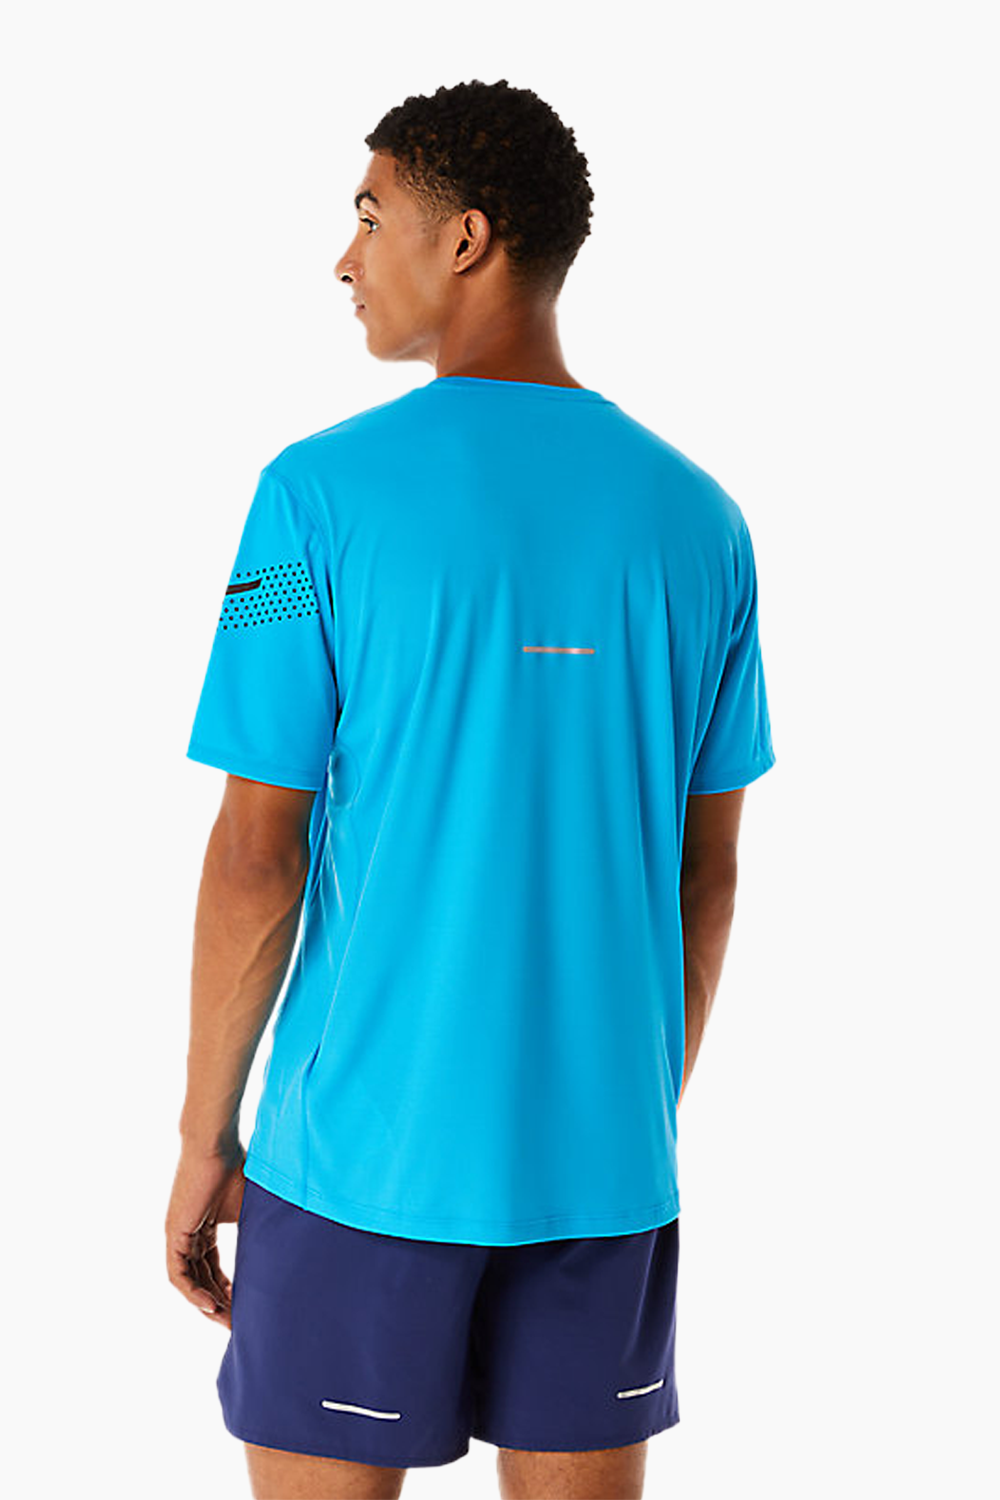 ASICS Men's Icon SS Top in Island Blue/Performance Black